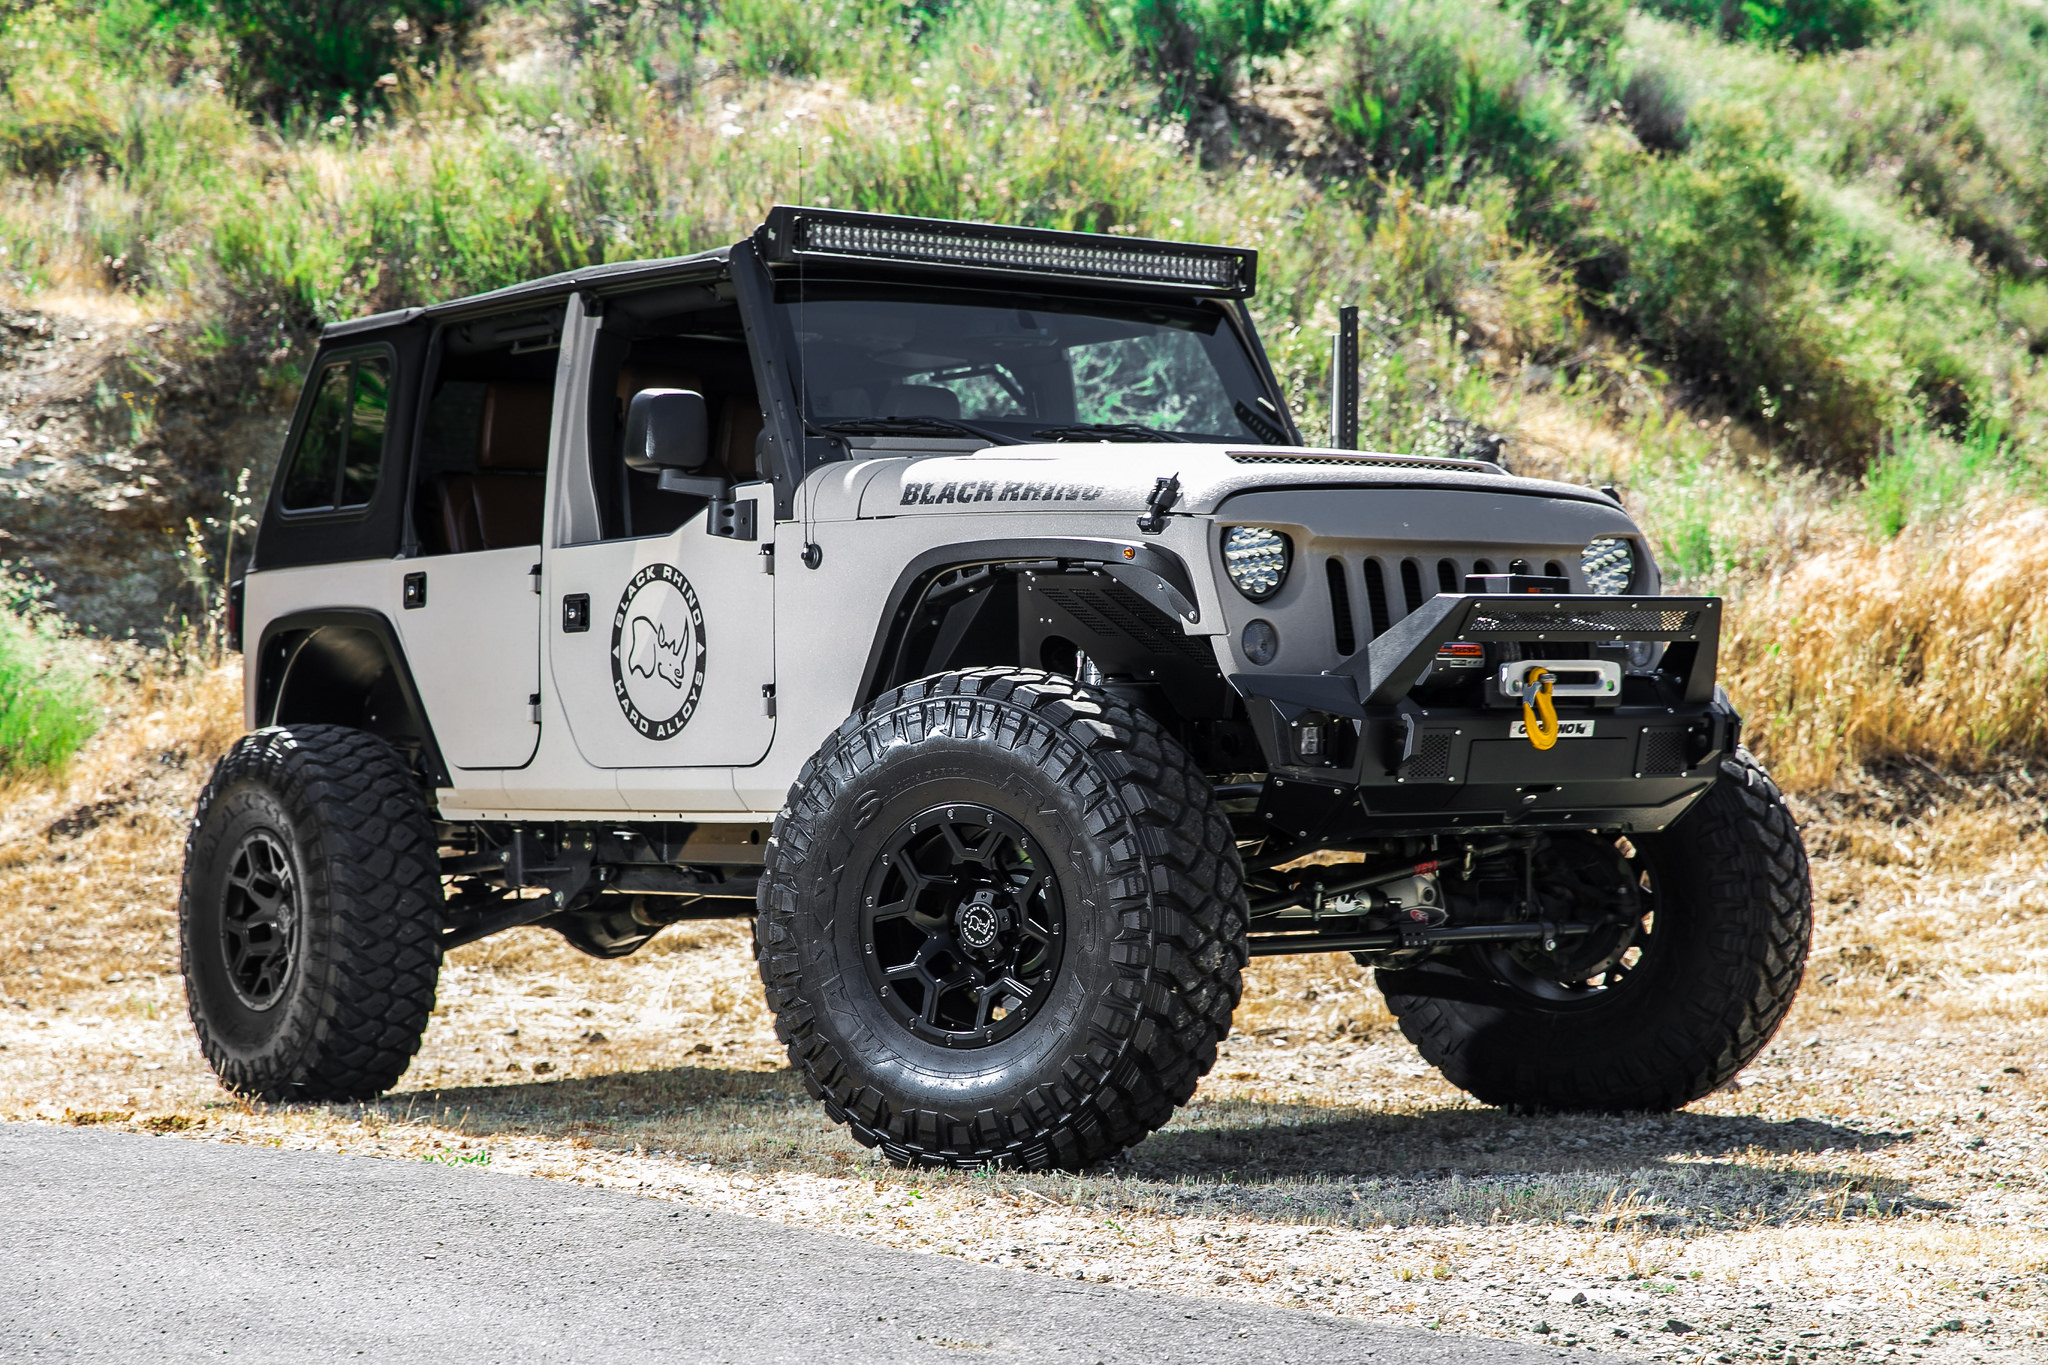 Black Rhino Truck Wheels Introduces the Overland